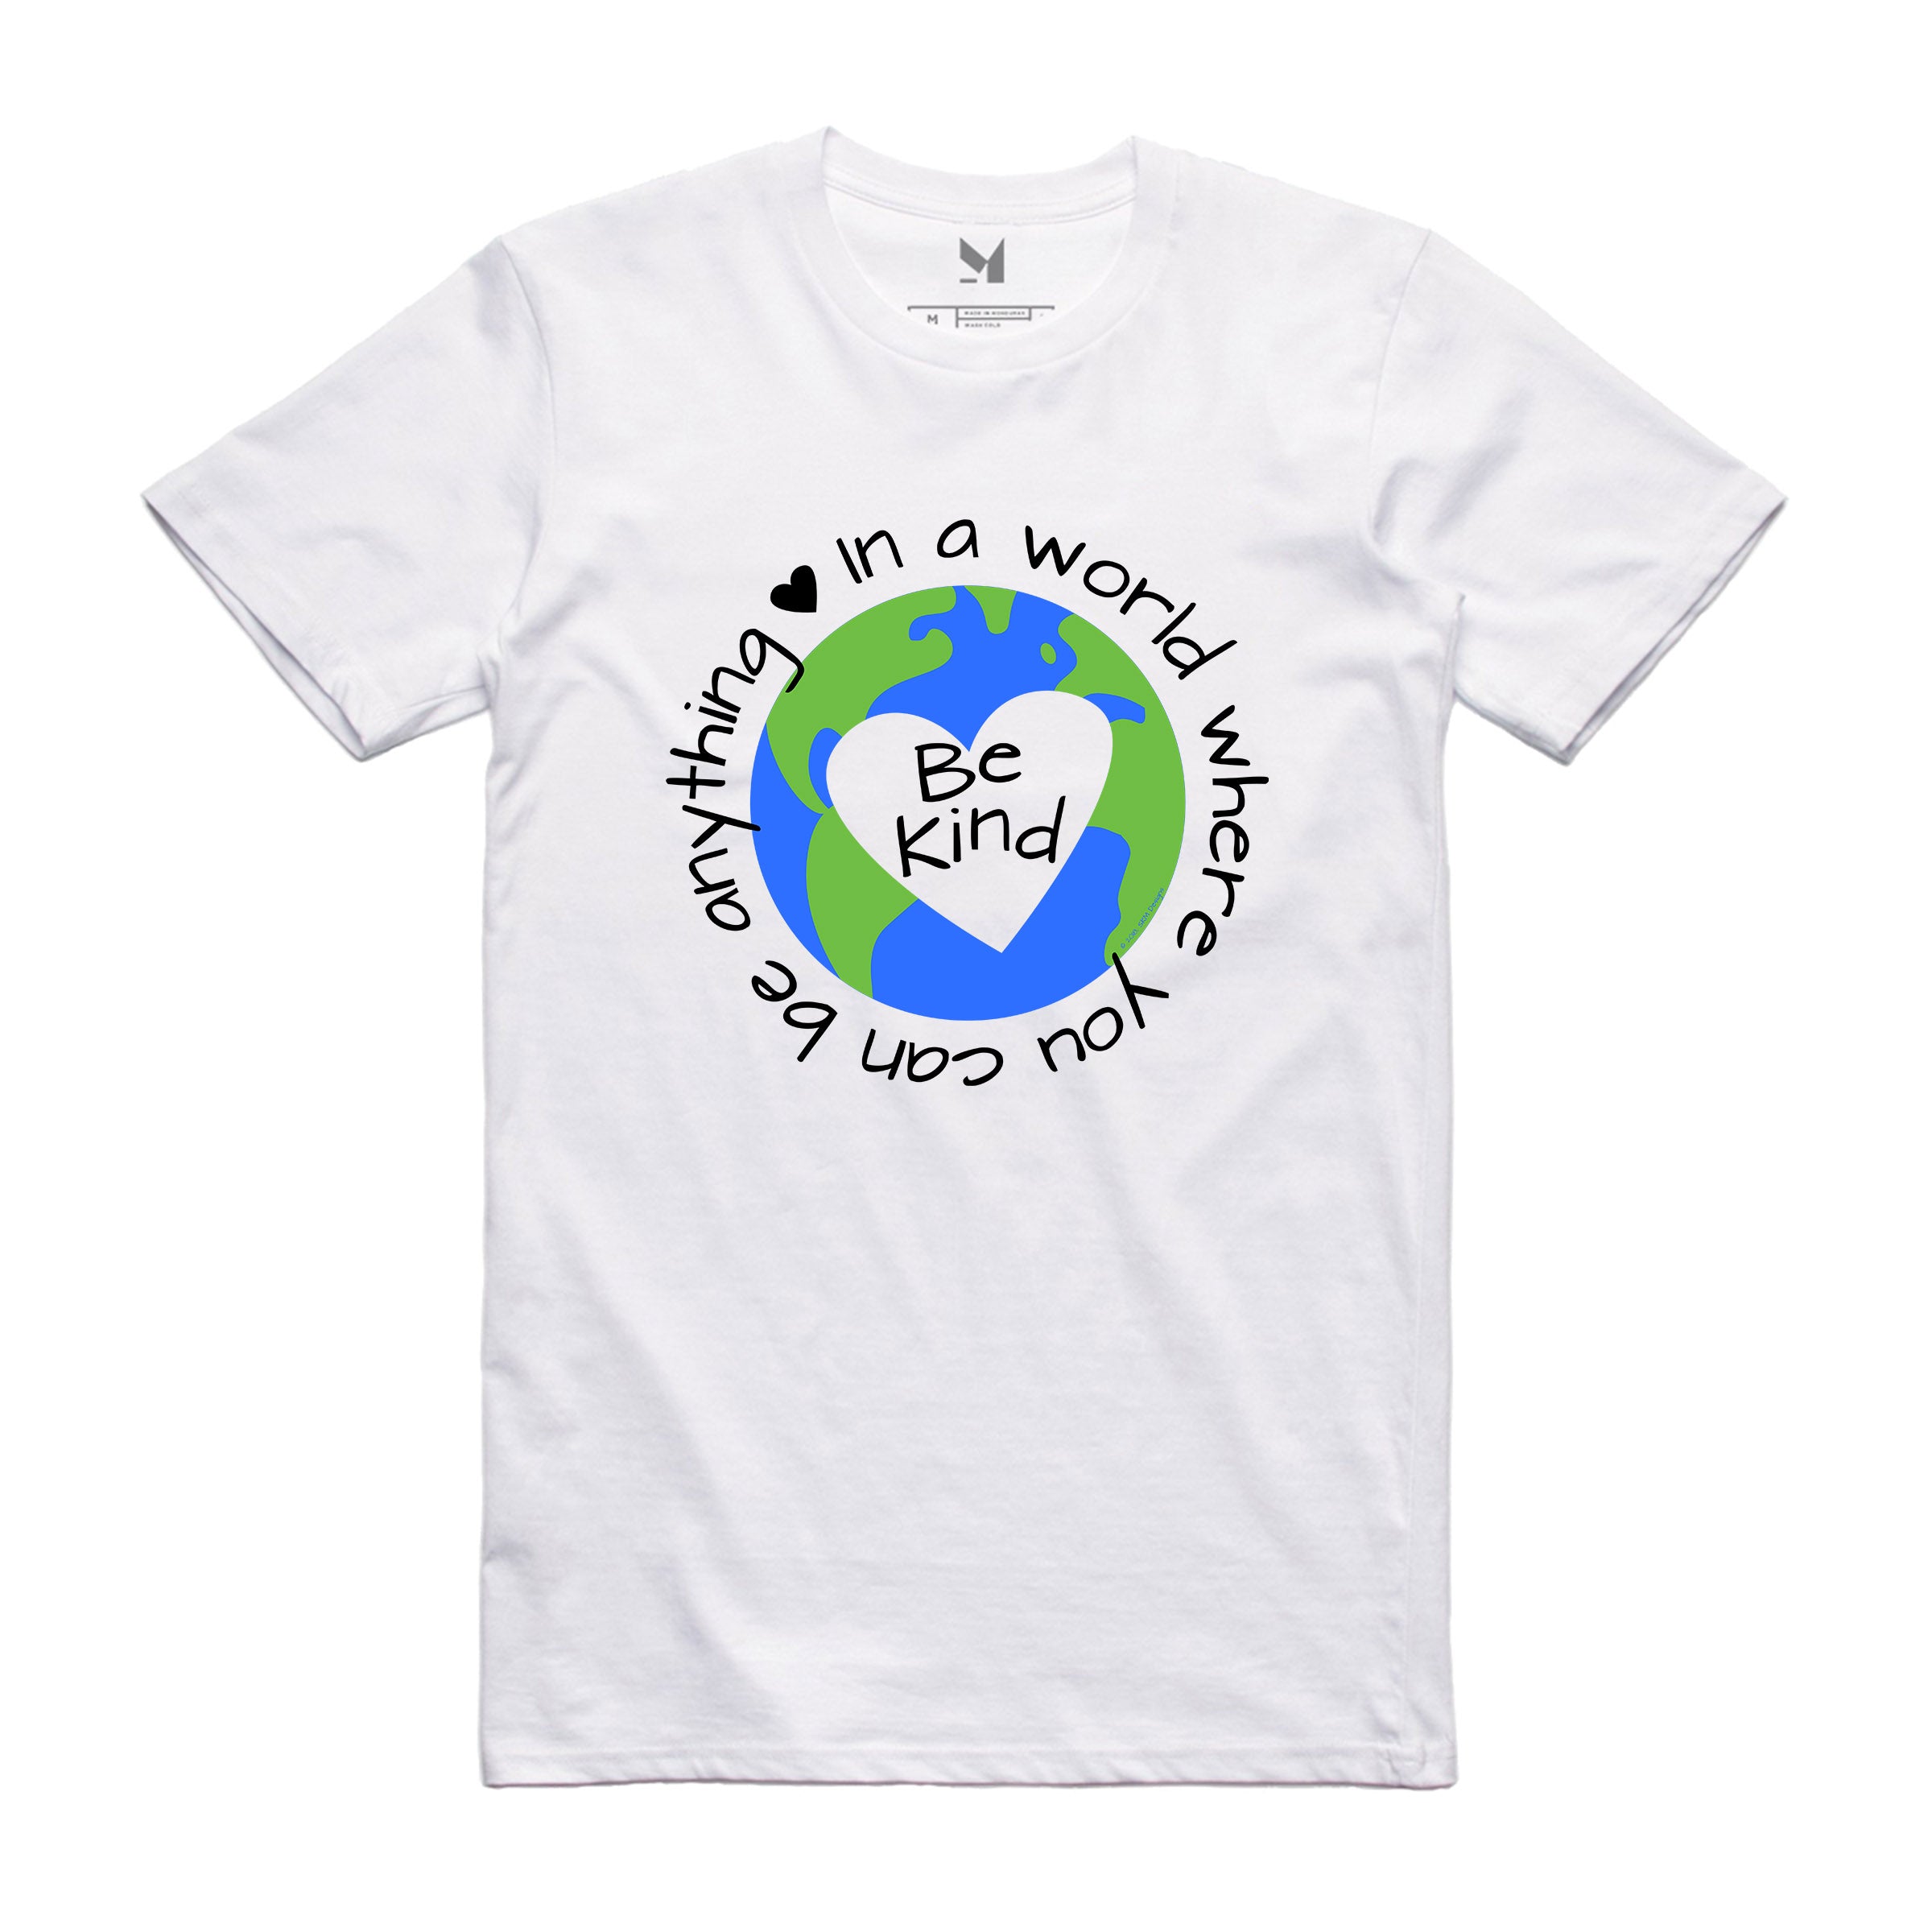 WHERE YOU CAN BE ANYTHING BE KIND TSHIRT